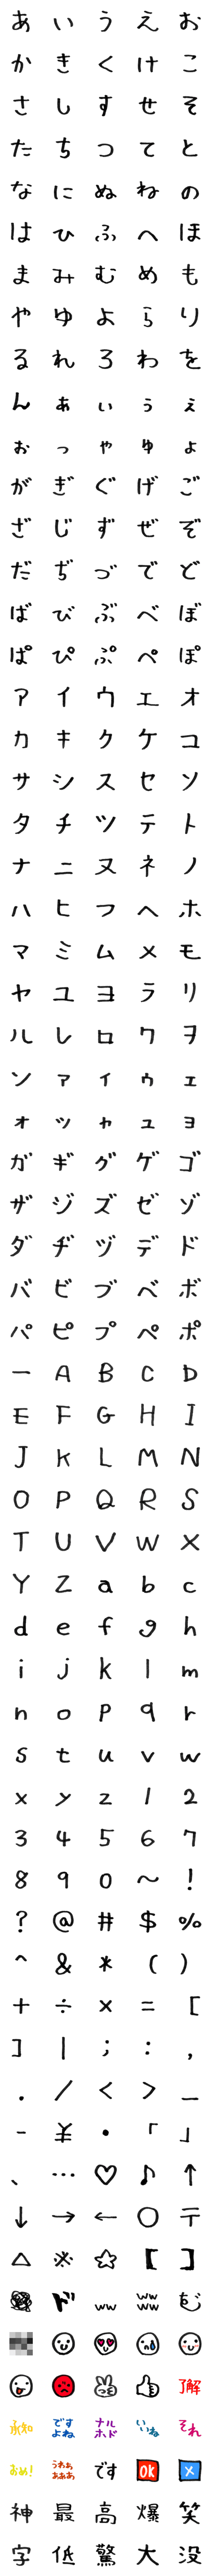 [LINE絵文字]ヘタ字（ペン手書き）の画像一覧